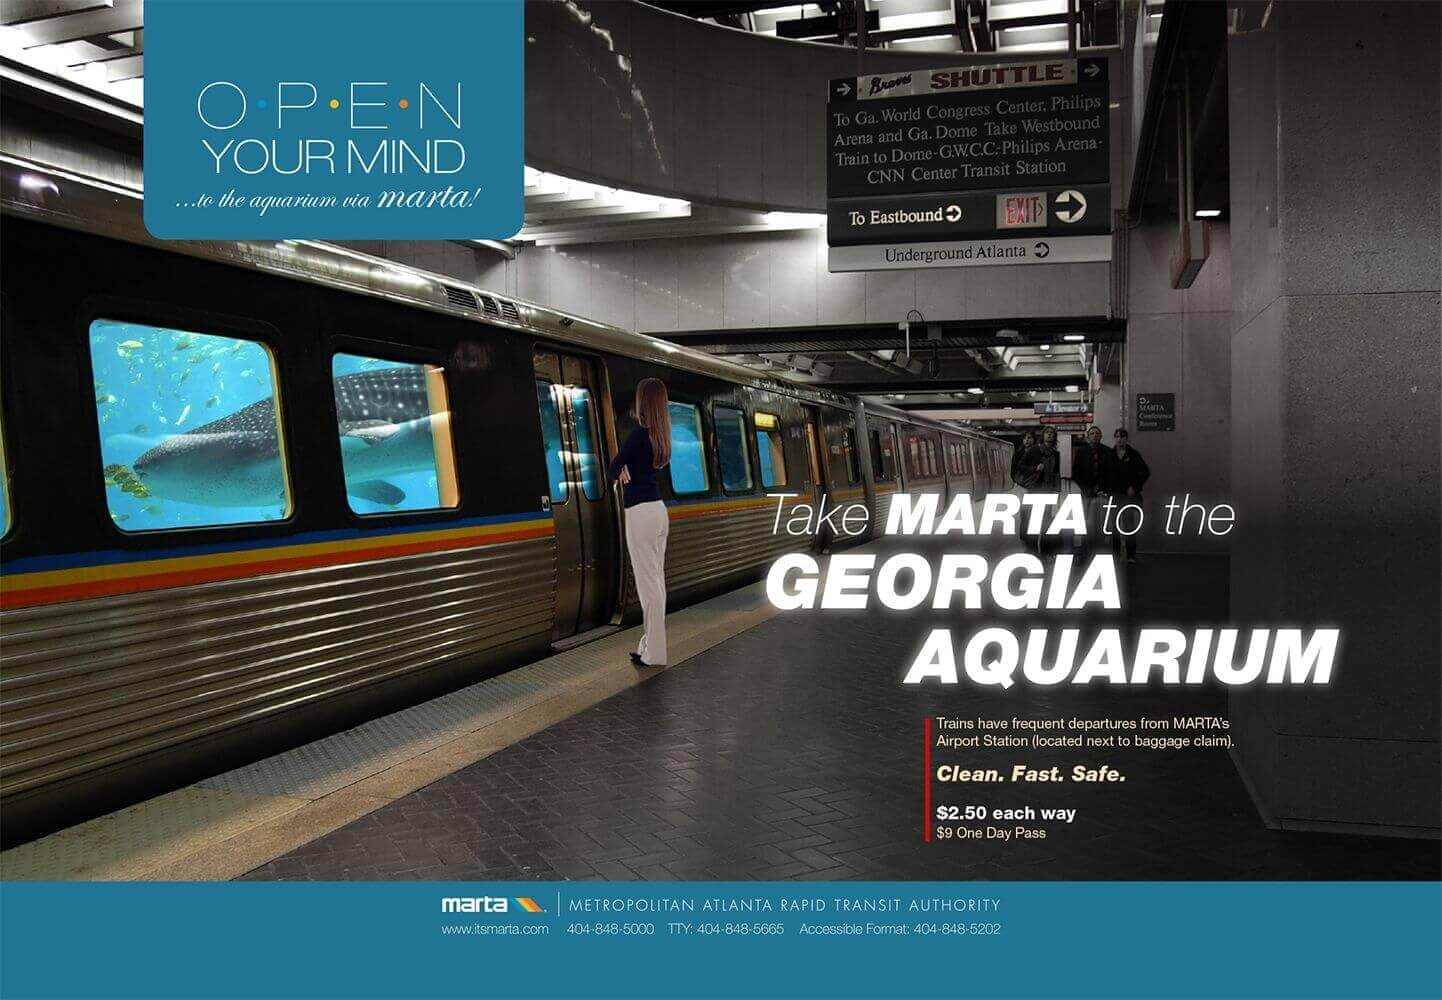 MARTA is not shy to advertise to commuters and give them a lasting impression